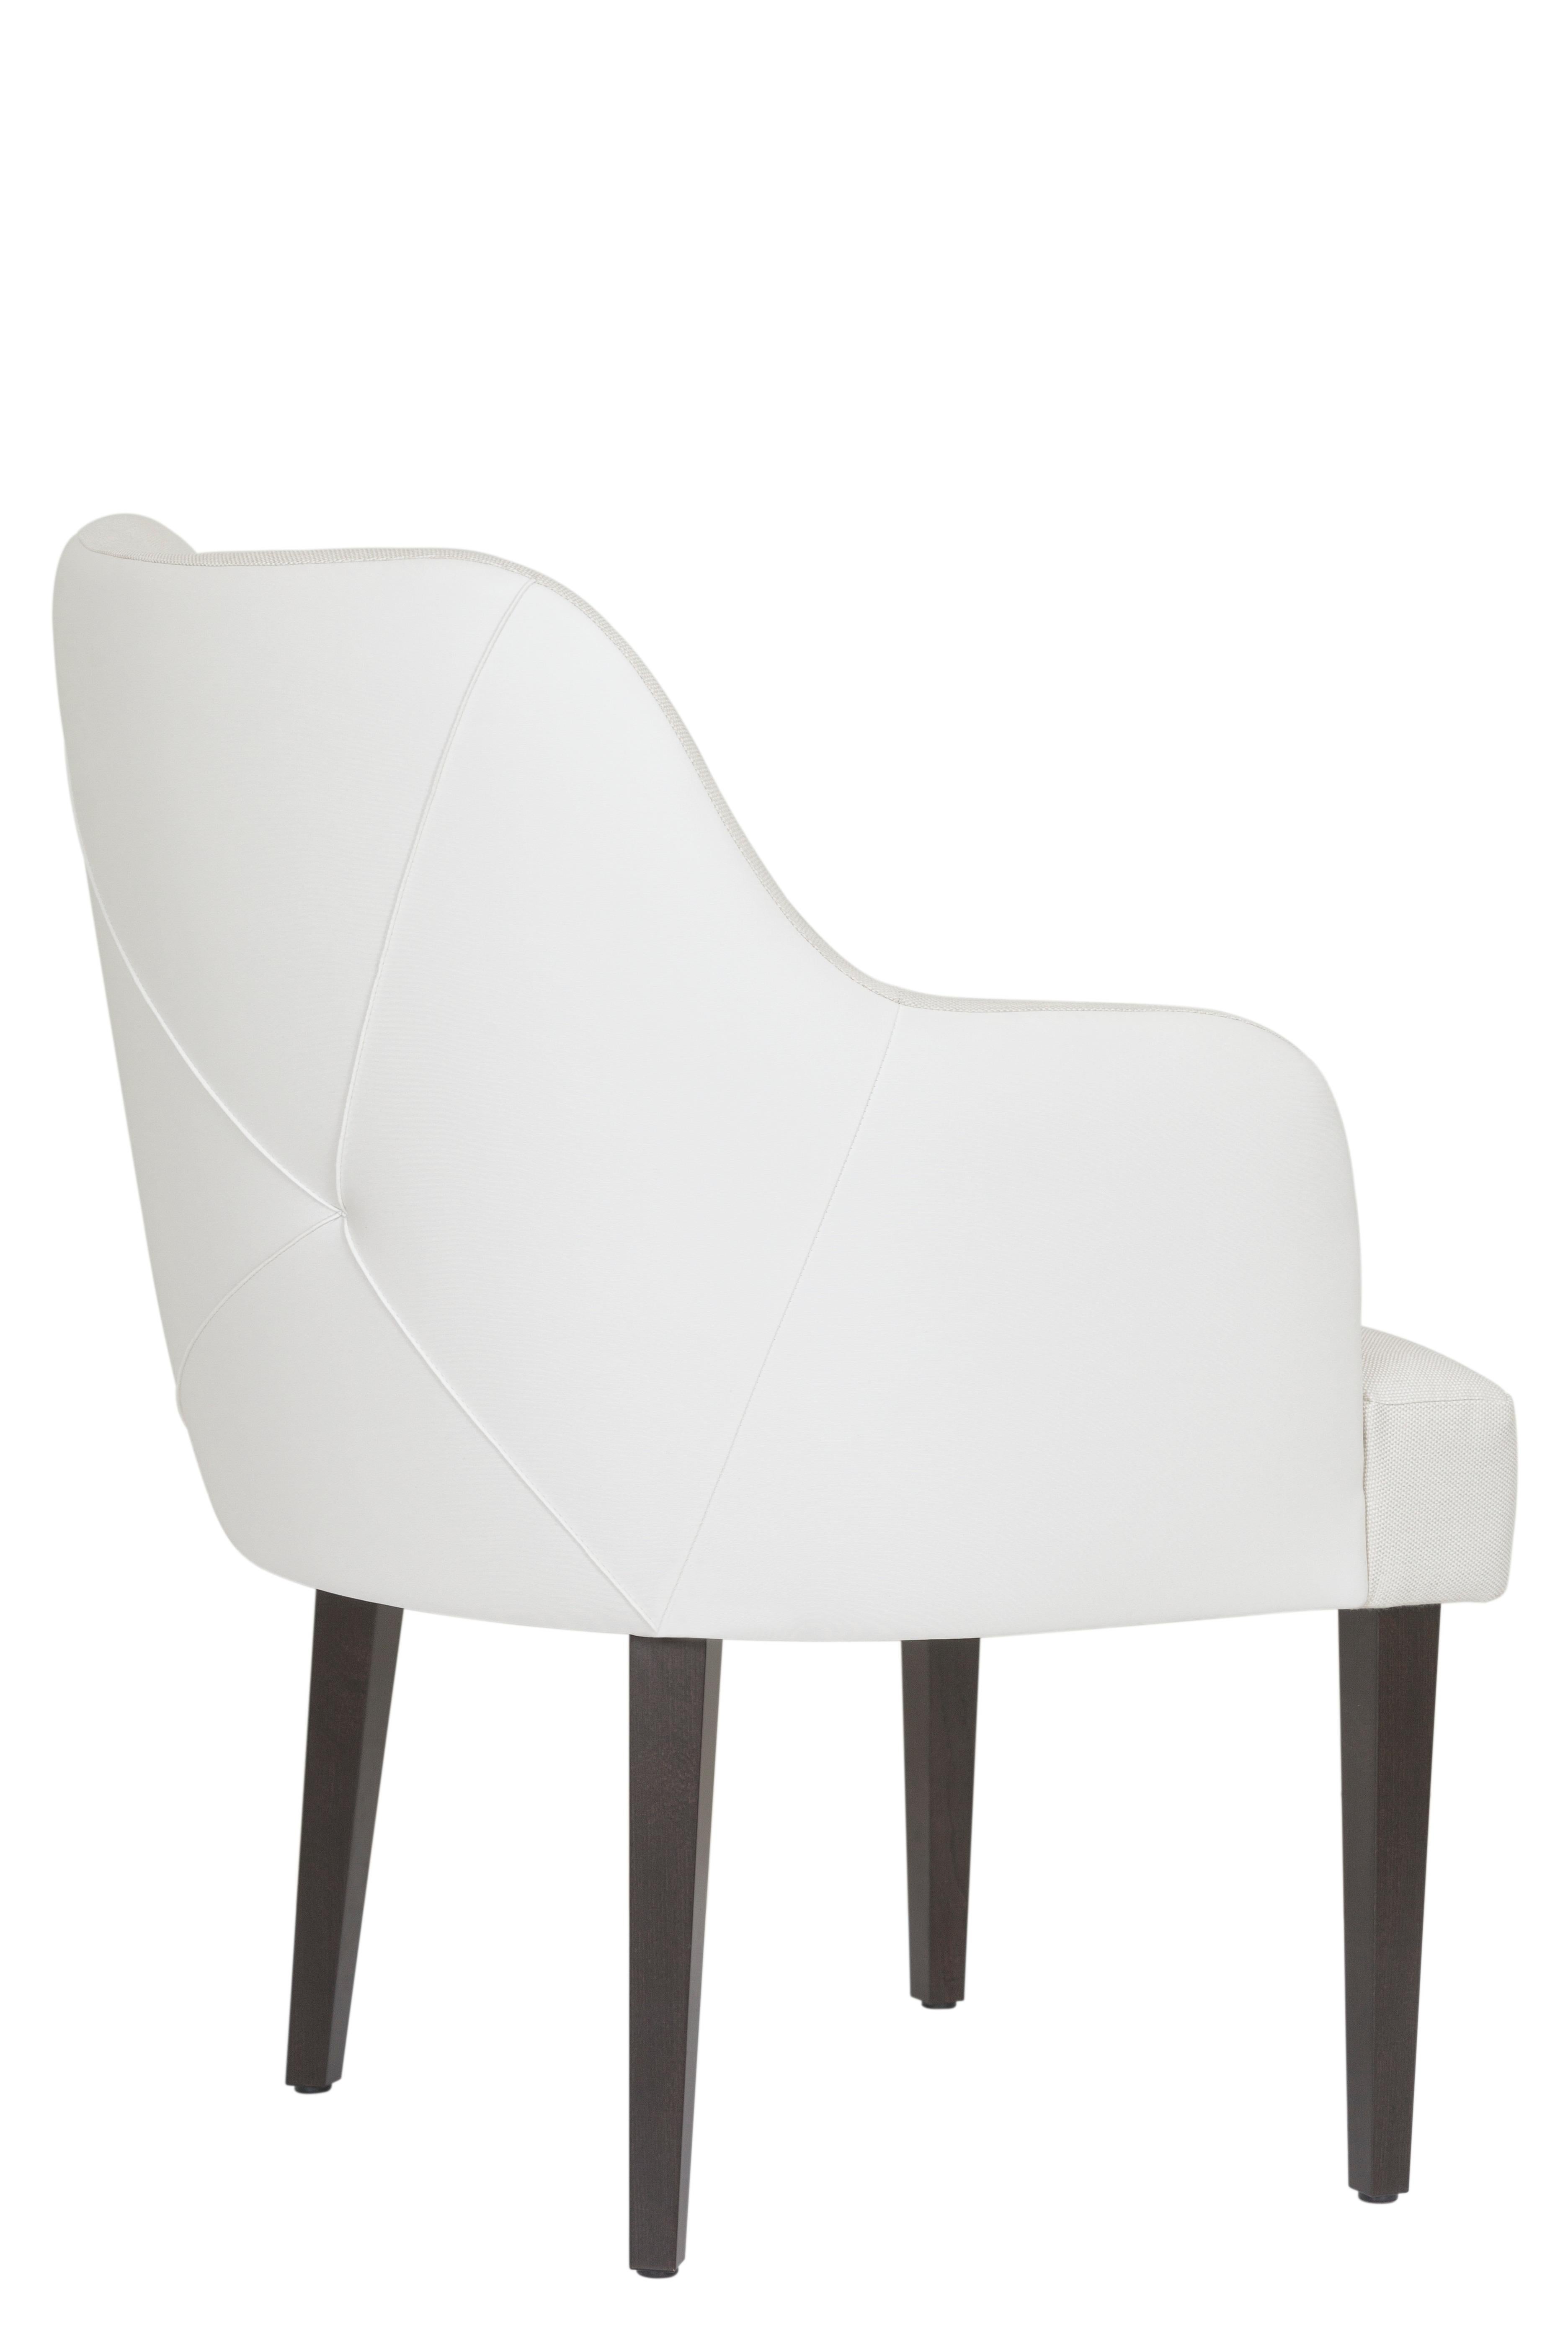 Portuguese Modern Margot Dining Chairs, White Leather, Handmade in Portugal by Greenapple For Sale